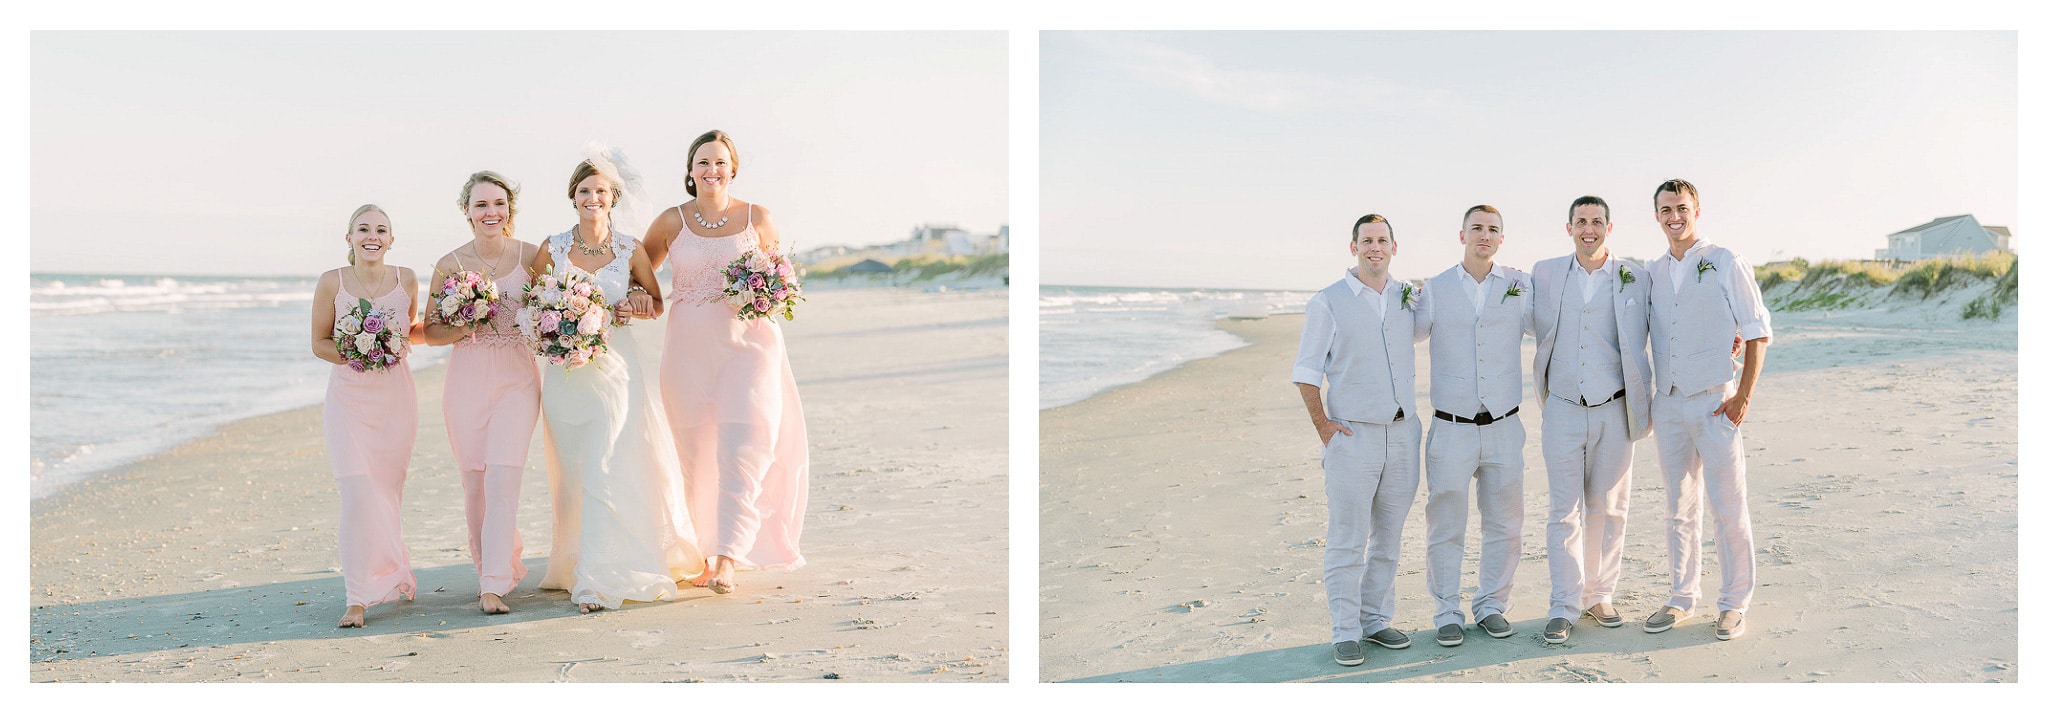 Wedding Party on the Beach - Venue - Beach House Gulf Stream Breeze, Beach Realty Catering and Cake - Buttercream Cakes and Catering, LLC Flowers - Callas Florist Event Rentals - Event Works DJ - Scott Shaw